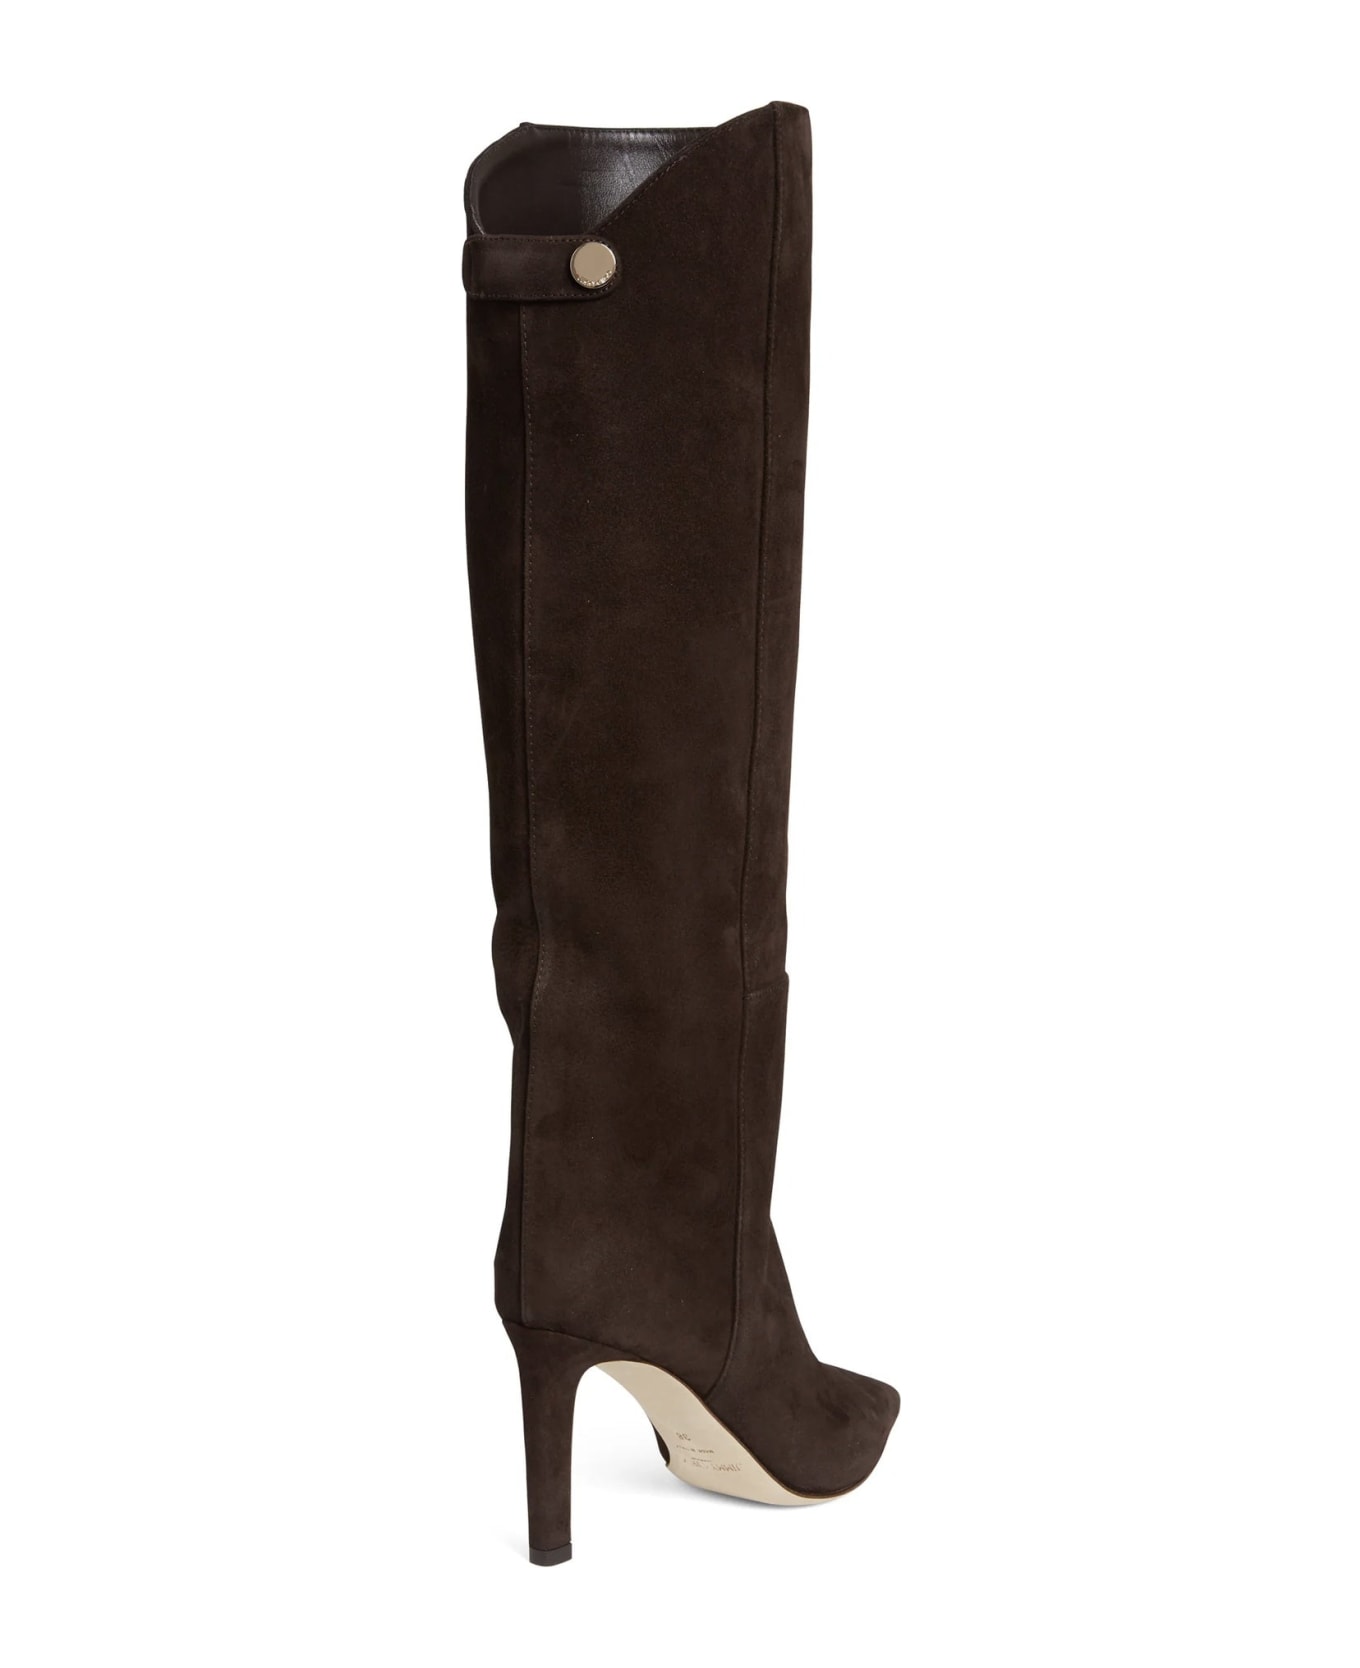 Jimmy Choo Alizze 85 Suede Boots - Brown ブーツ